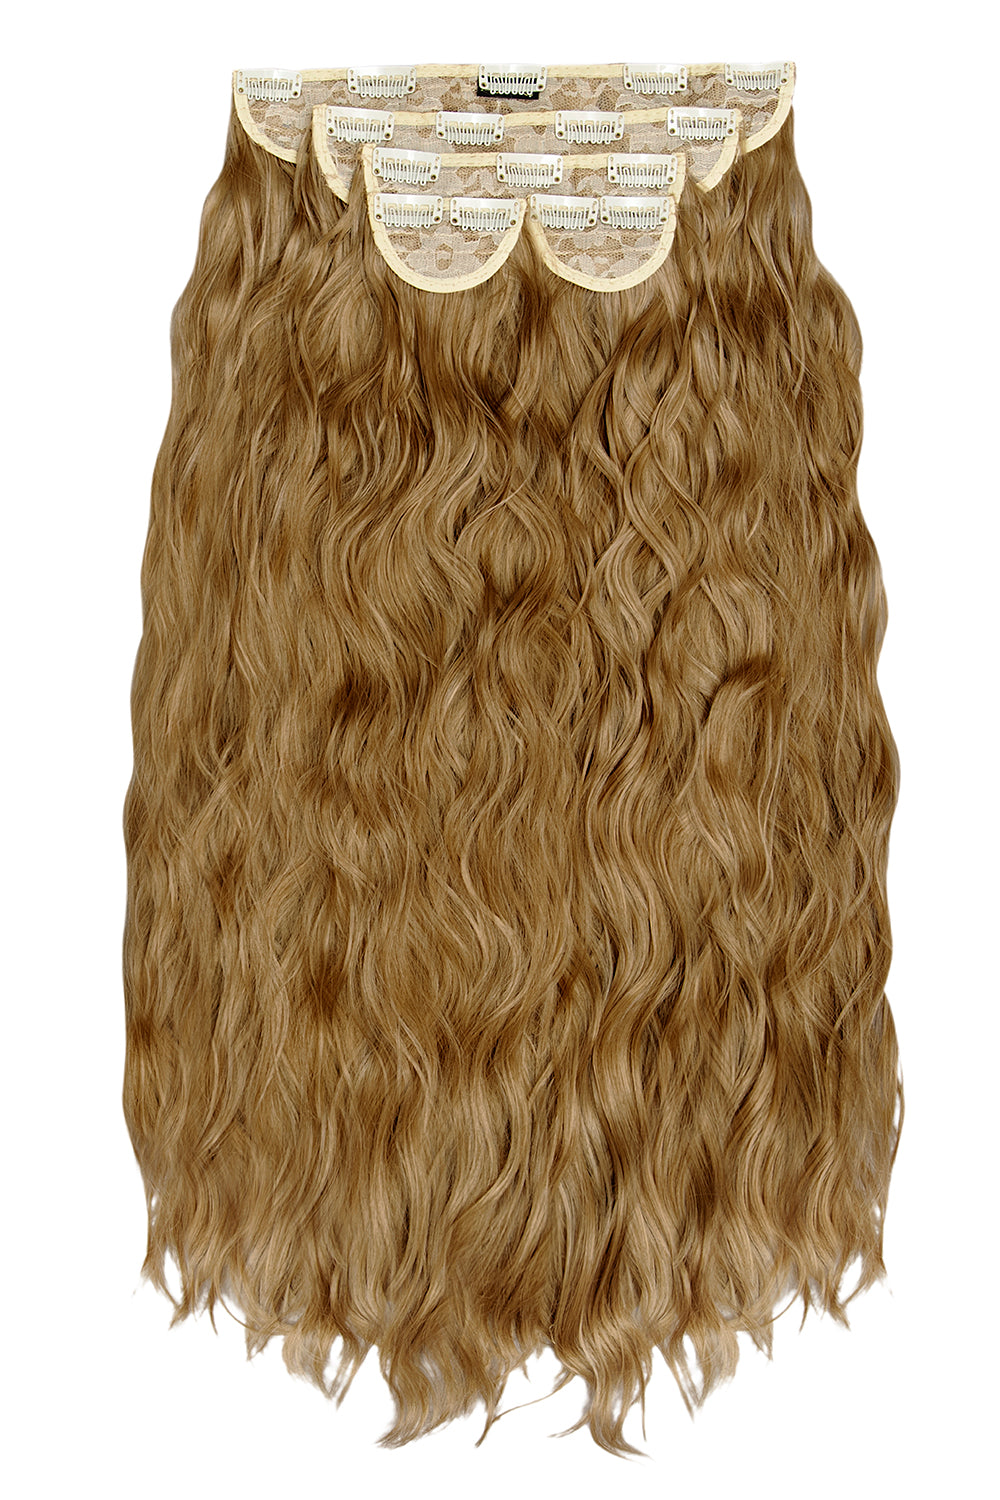 Super Thick 26" 5 Piece Waist Length Wave Clip In Hair Extensions - LullaBellz  - Harvest Blonde